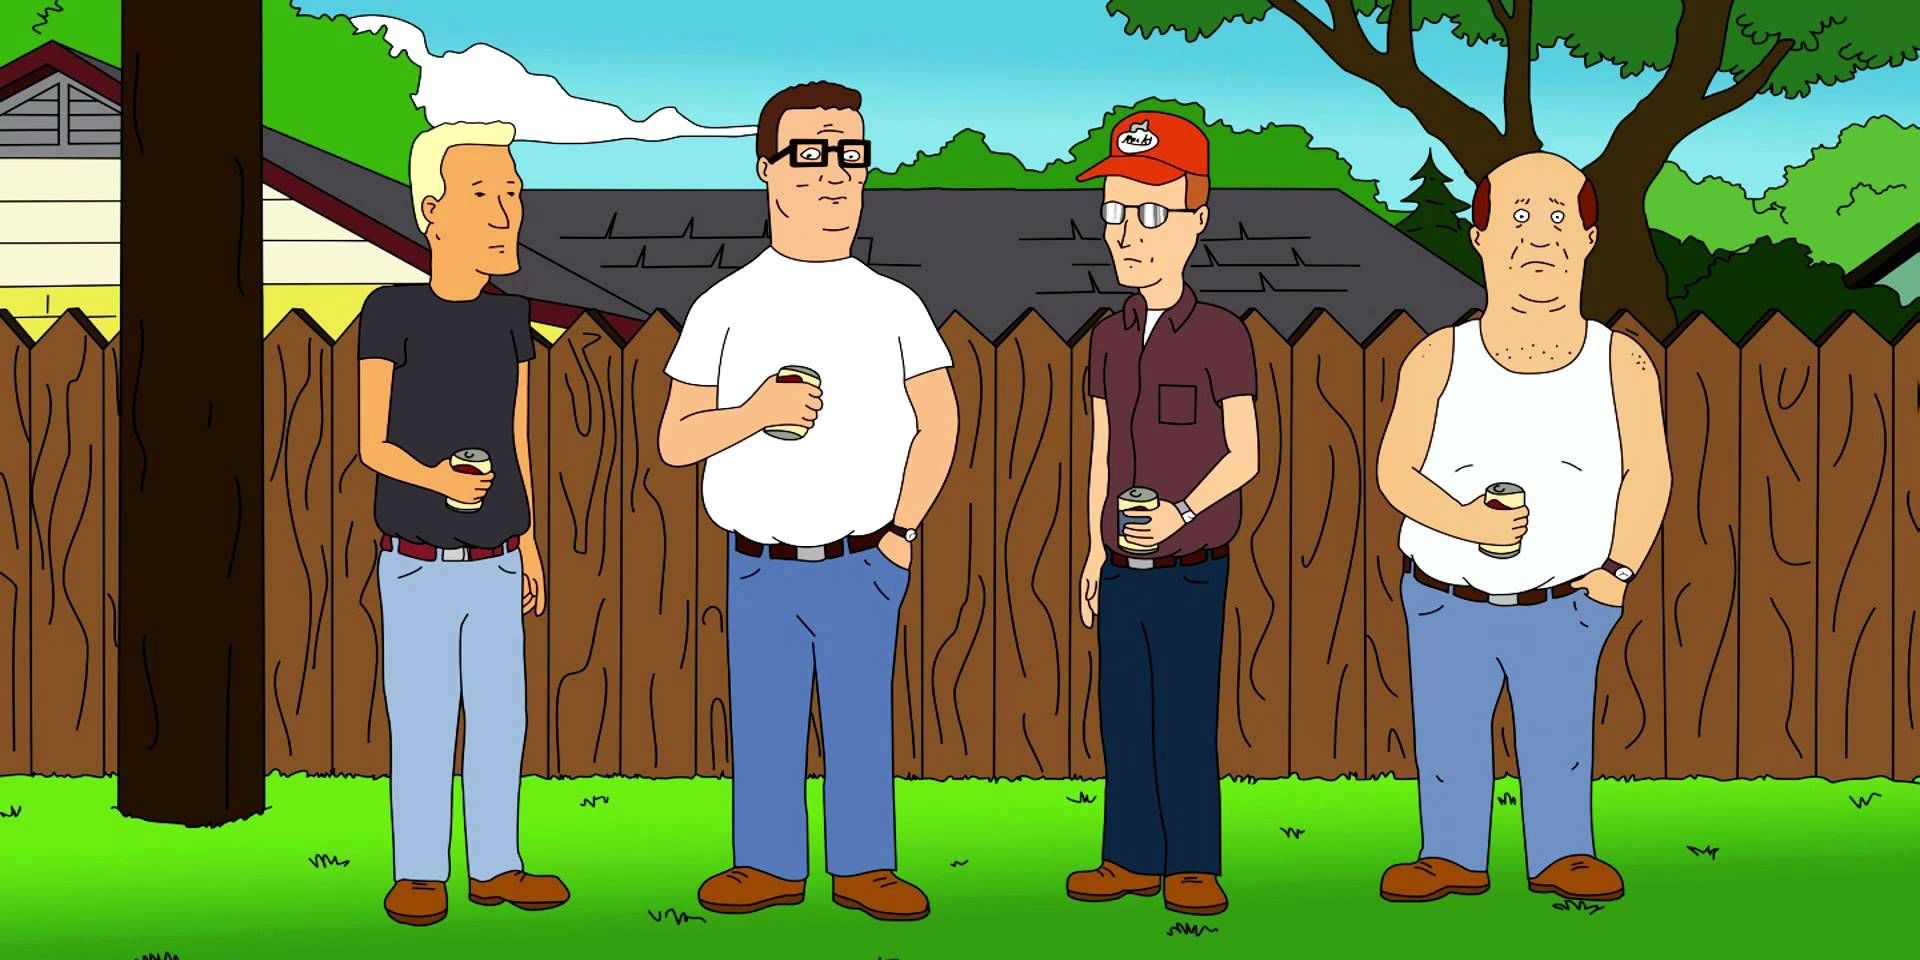 The animated cast from King of the Hill